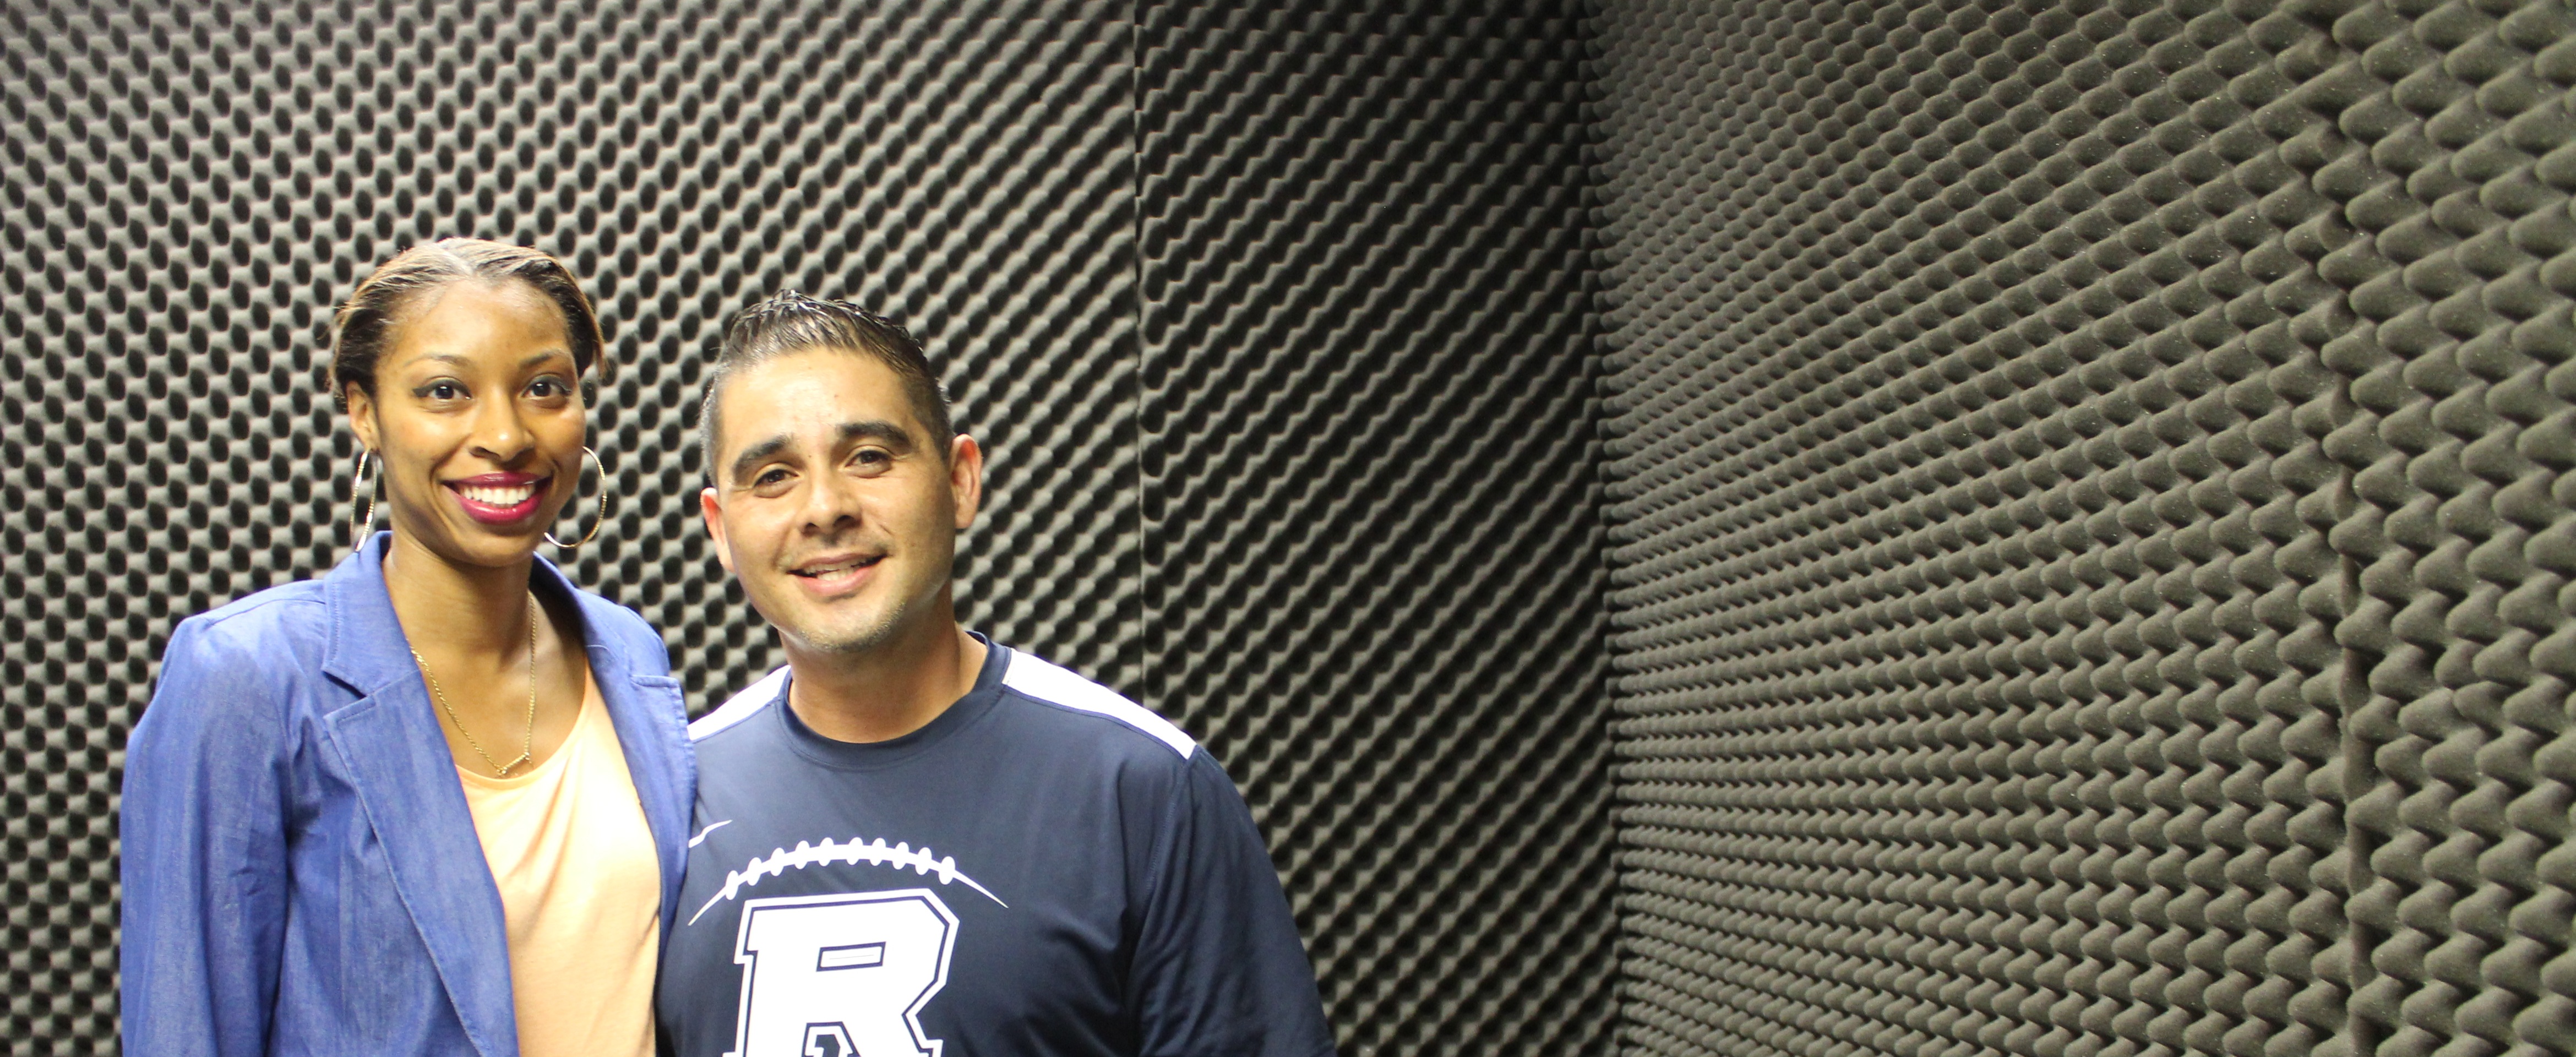 Beyond the Game – 09.19.14 – Alonso Arreola and Reseda High School Football